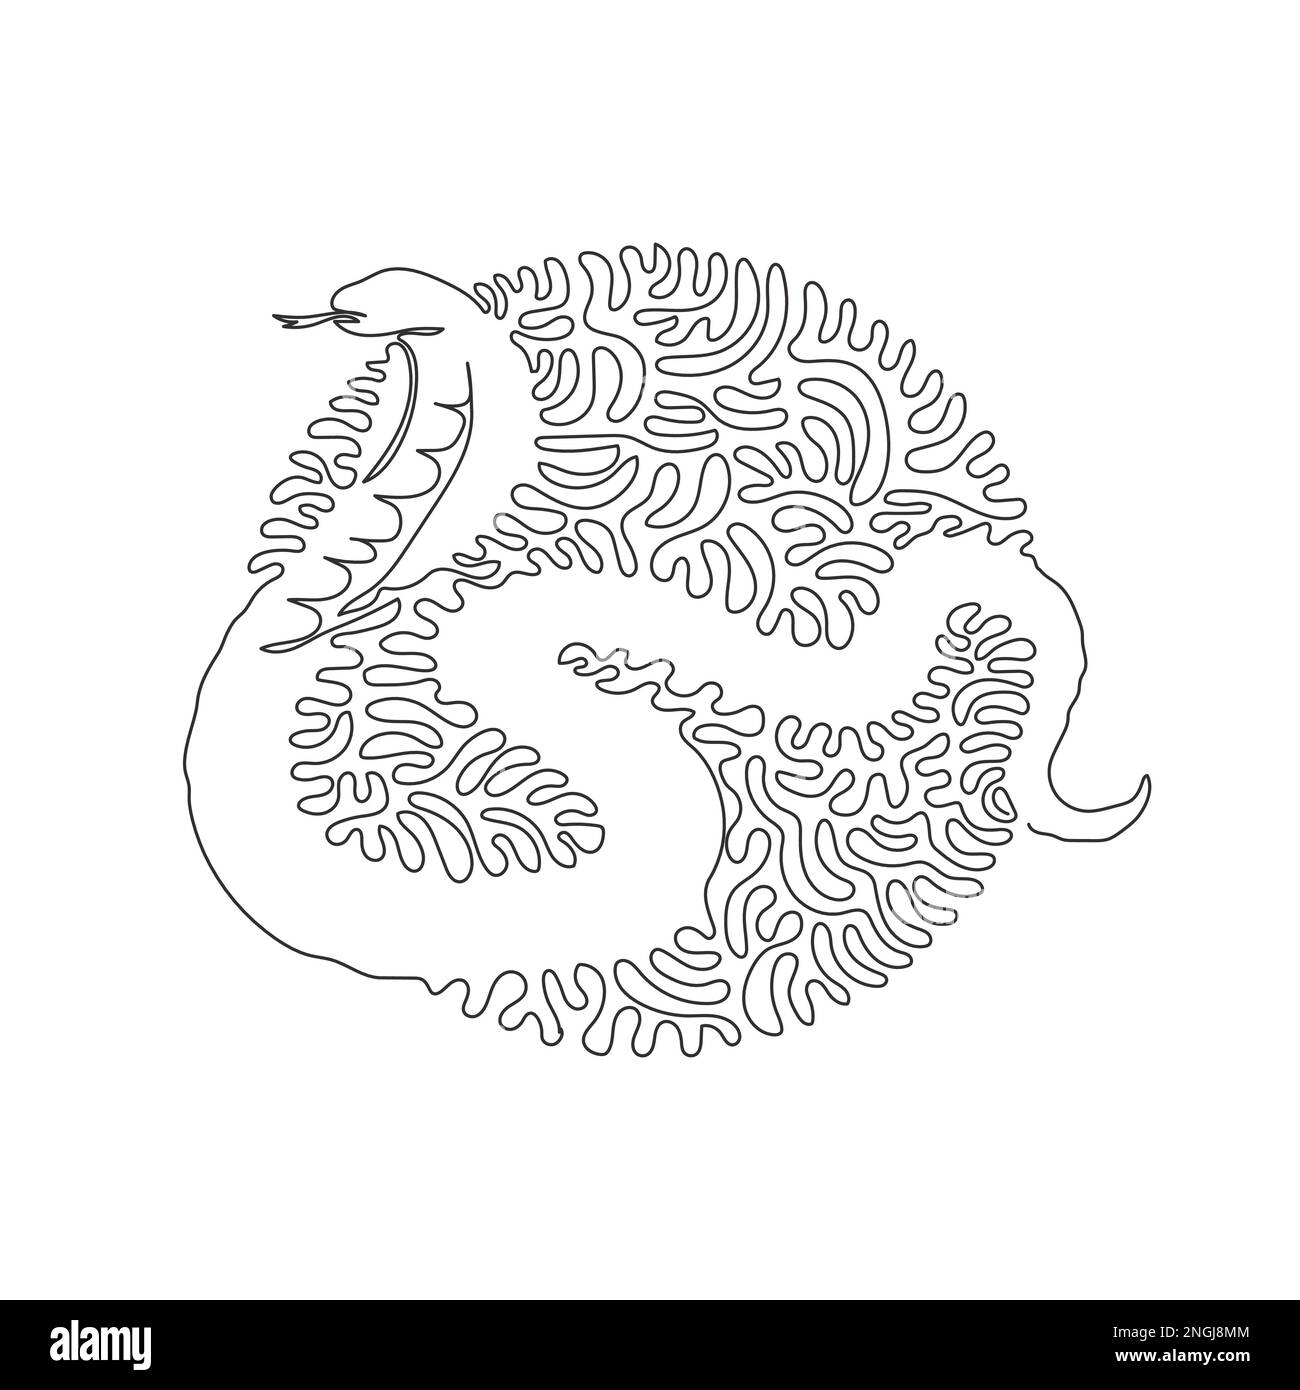 Single swirl continuous line drawing of a dangerous cobra. Continuous line drawing design vector illustration style of highly venomous cobra Stock Vector